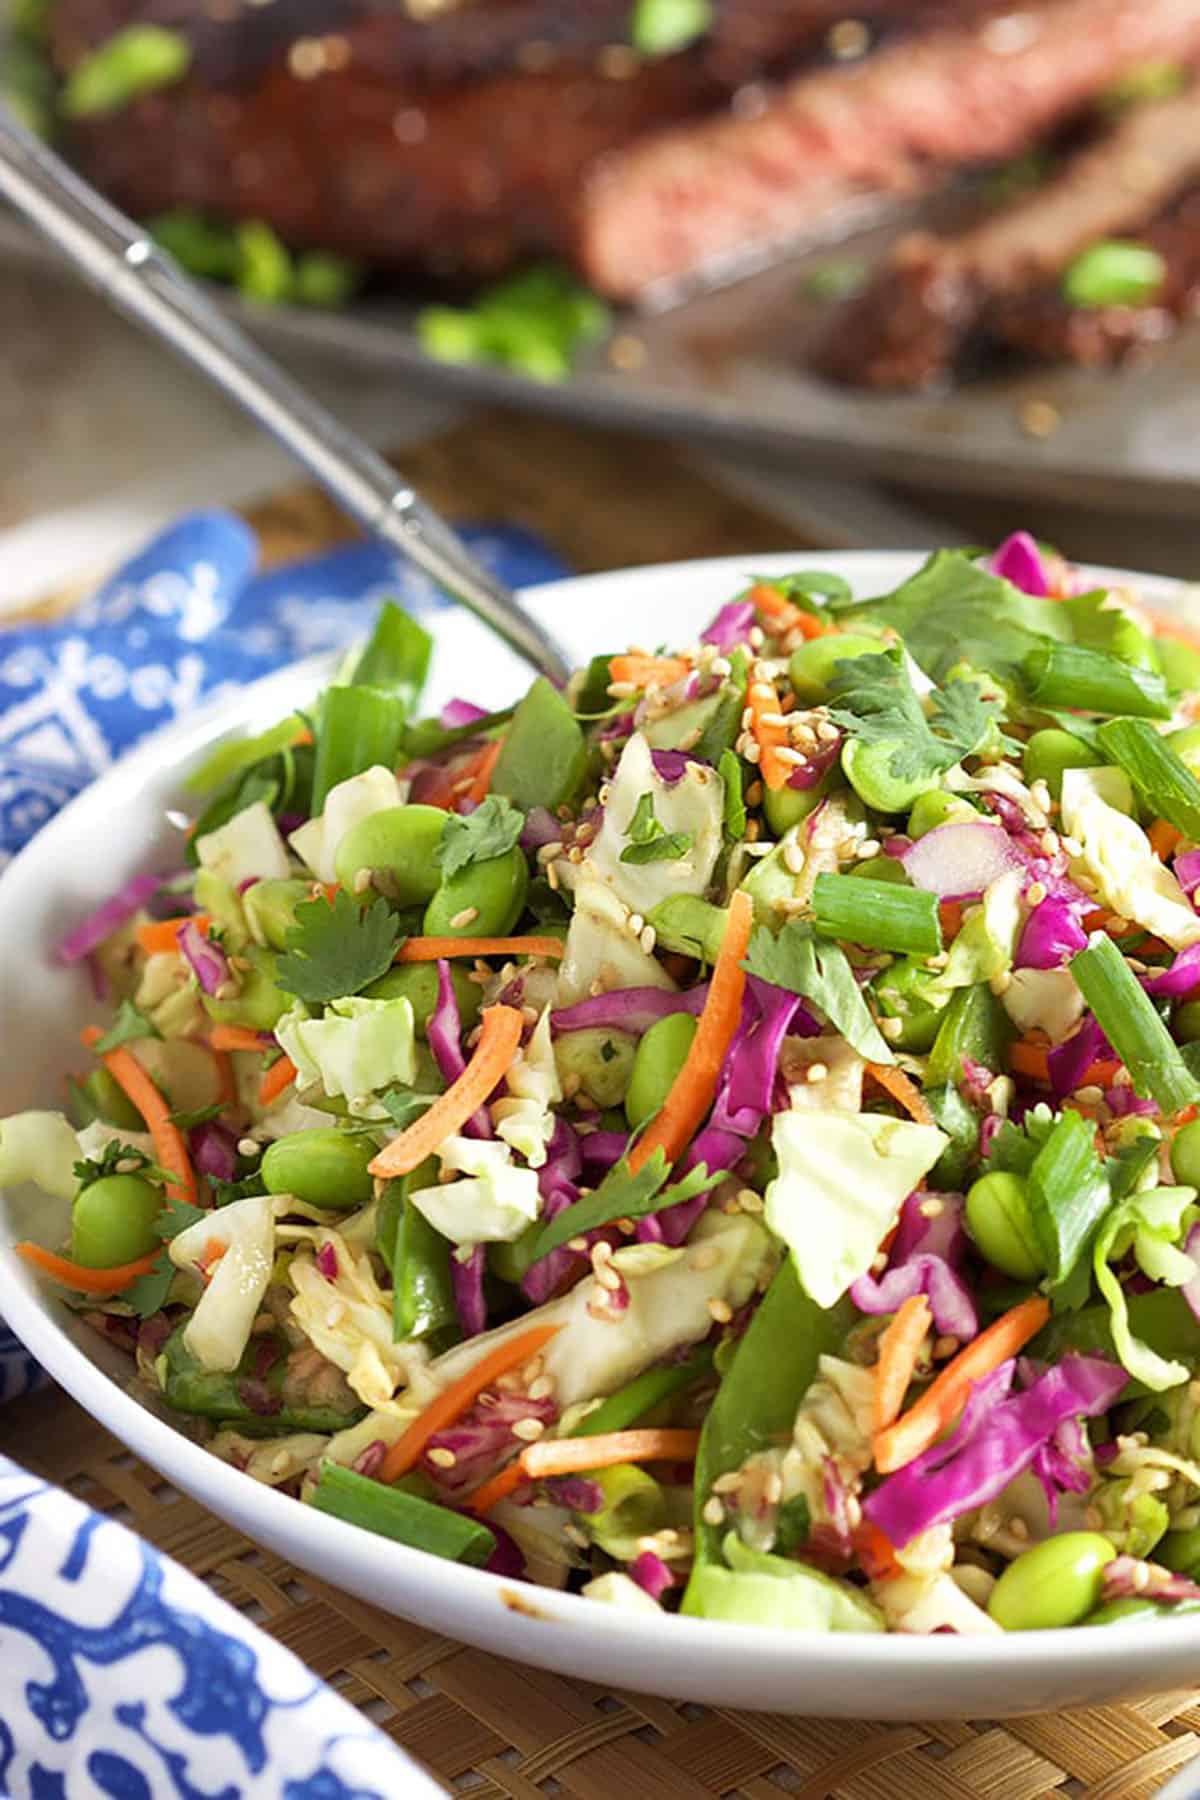 Asian slaw in a white bowl with a silver spoon and a blue and white napkin to the left.